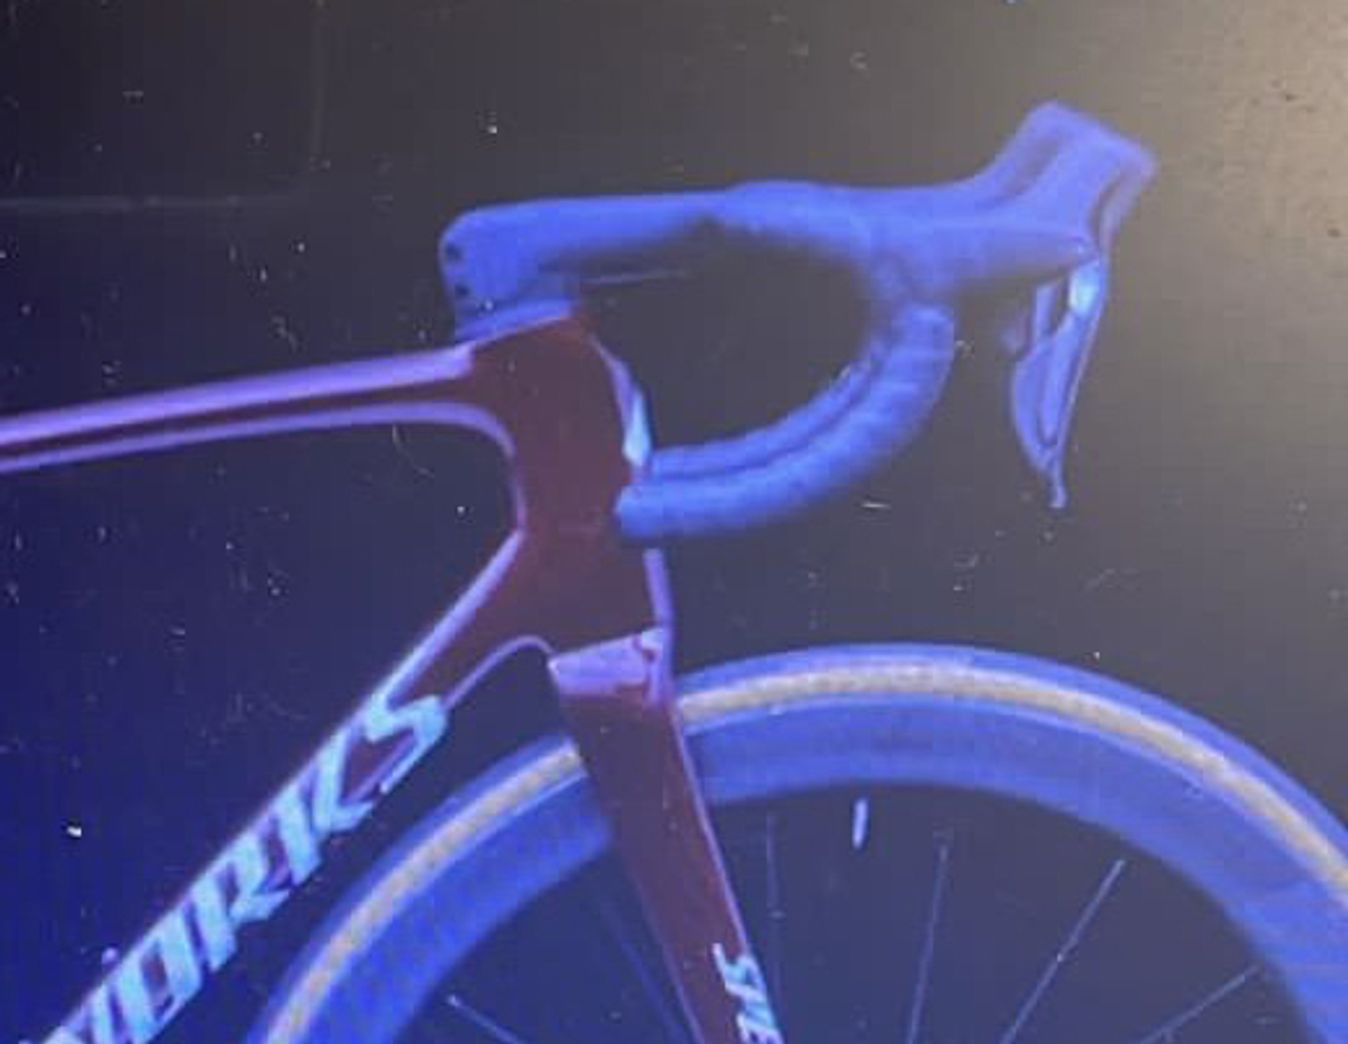 The Tarmac SL8 appears to have a deeper head tube.